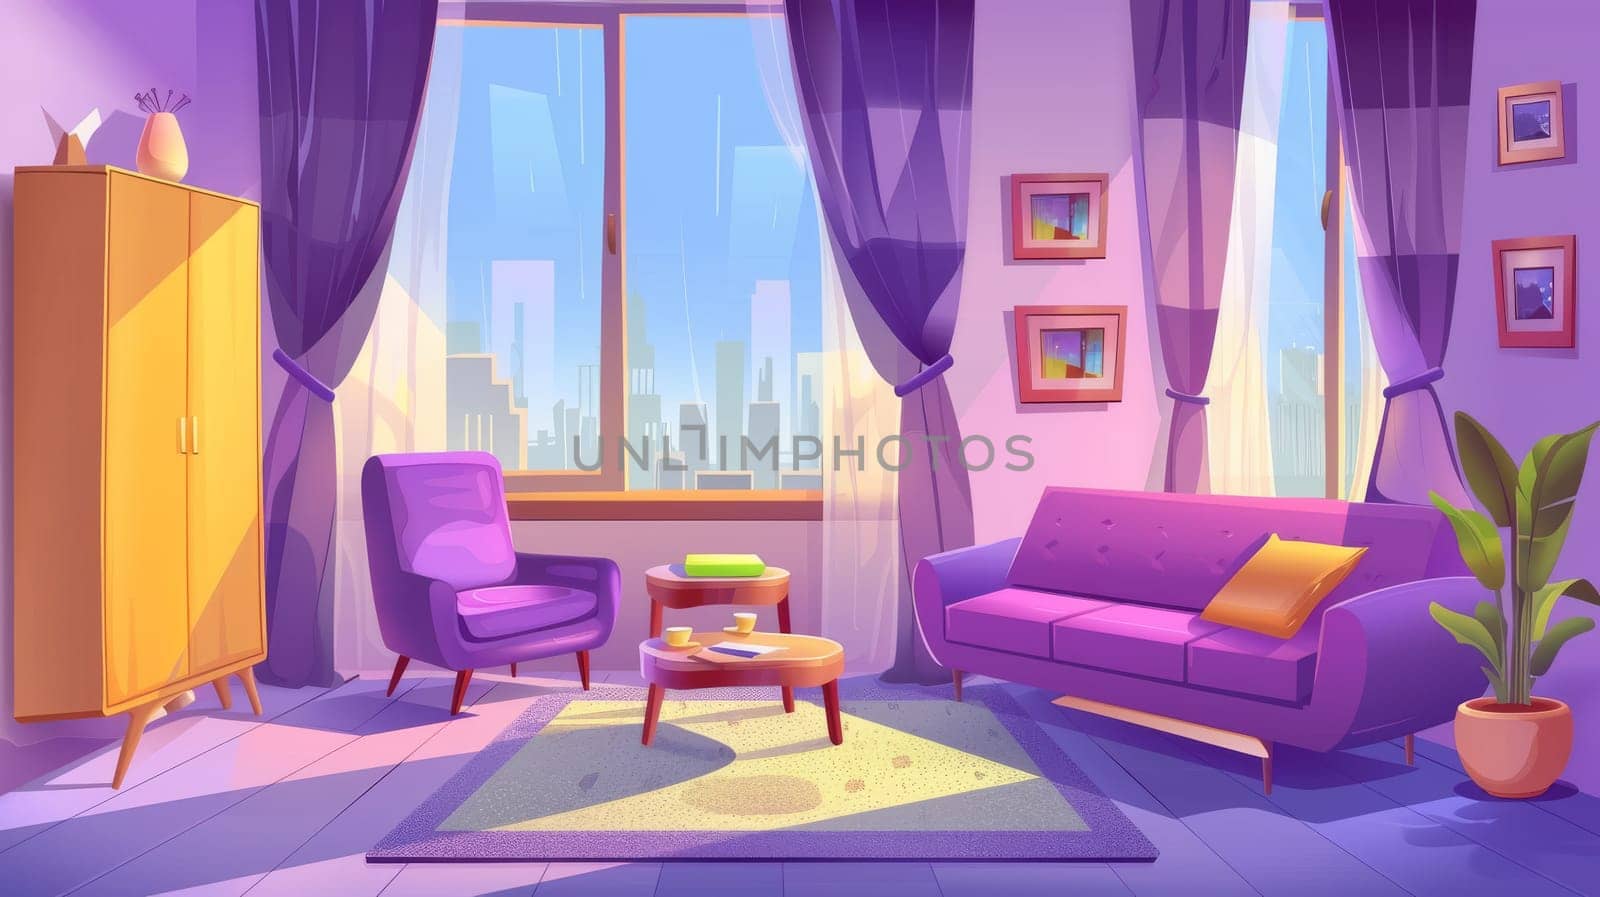 In this modern illustration you can see an empty lounge interior with a sofa, chair, cabinet, books on a table, and a large window in a modern living room with purple upholstery and curtains.